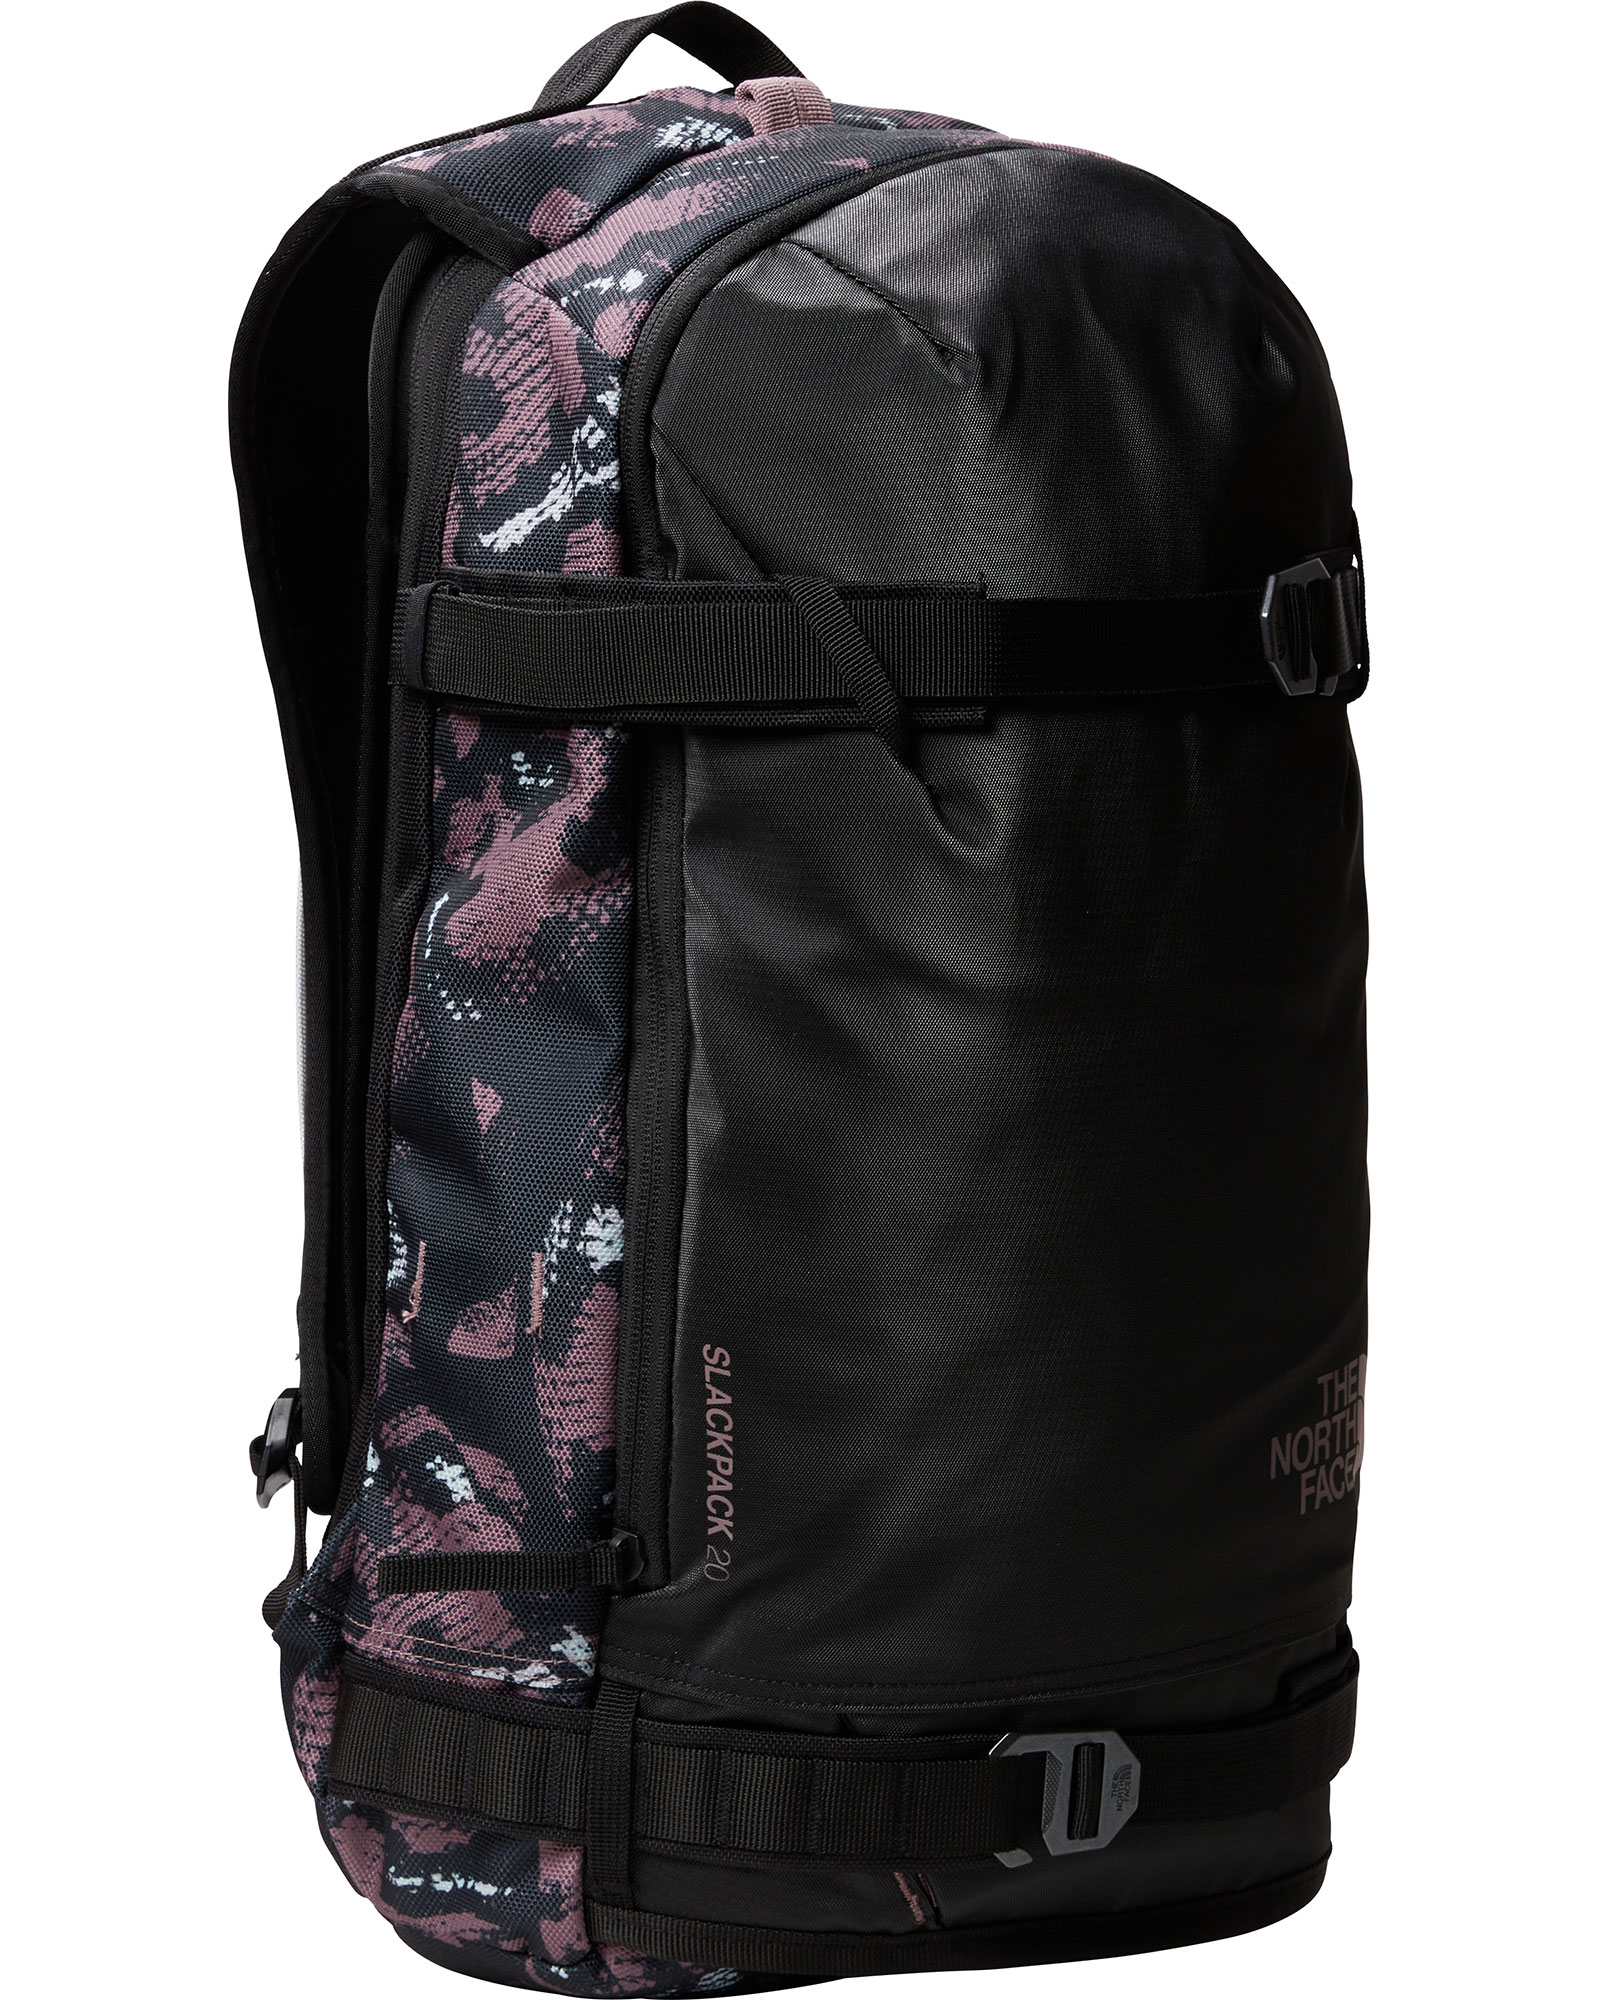 The North Face Women’s Slackpack 2.0 Expedition Backpack - Fawn Grey Snake Charmer Print/TNF Black/ Fawn Grey